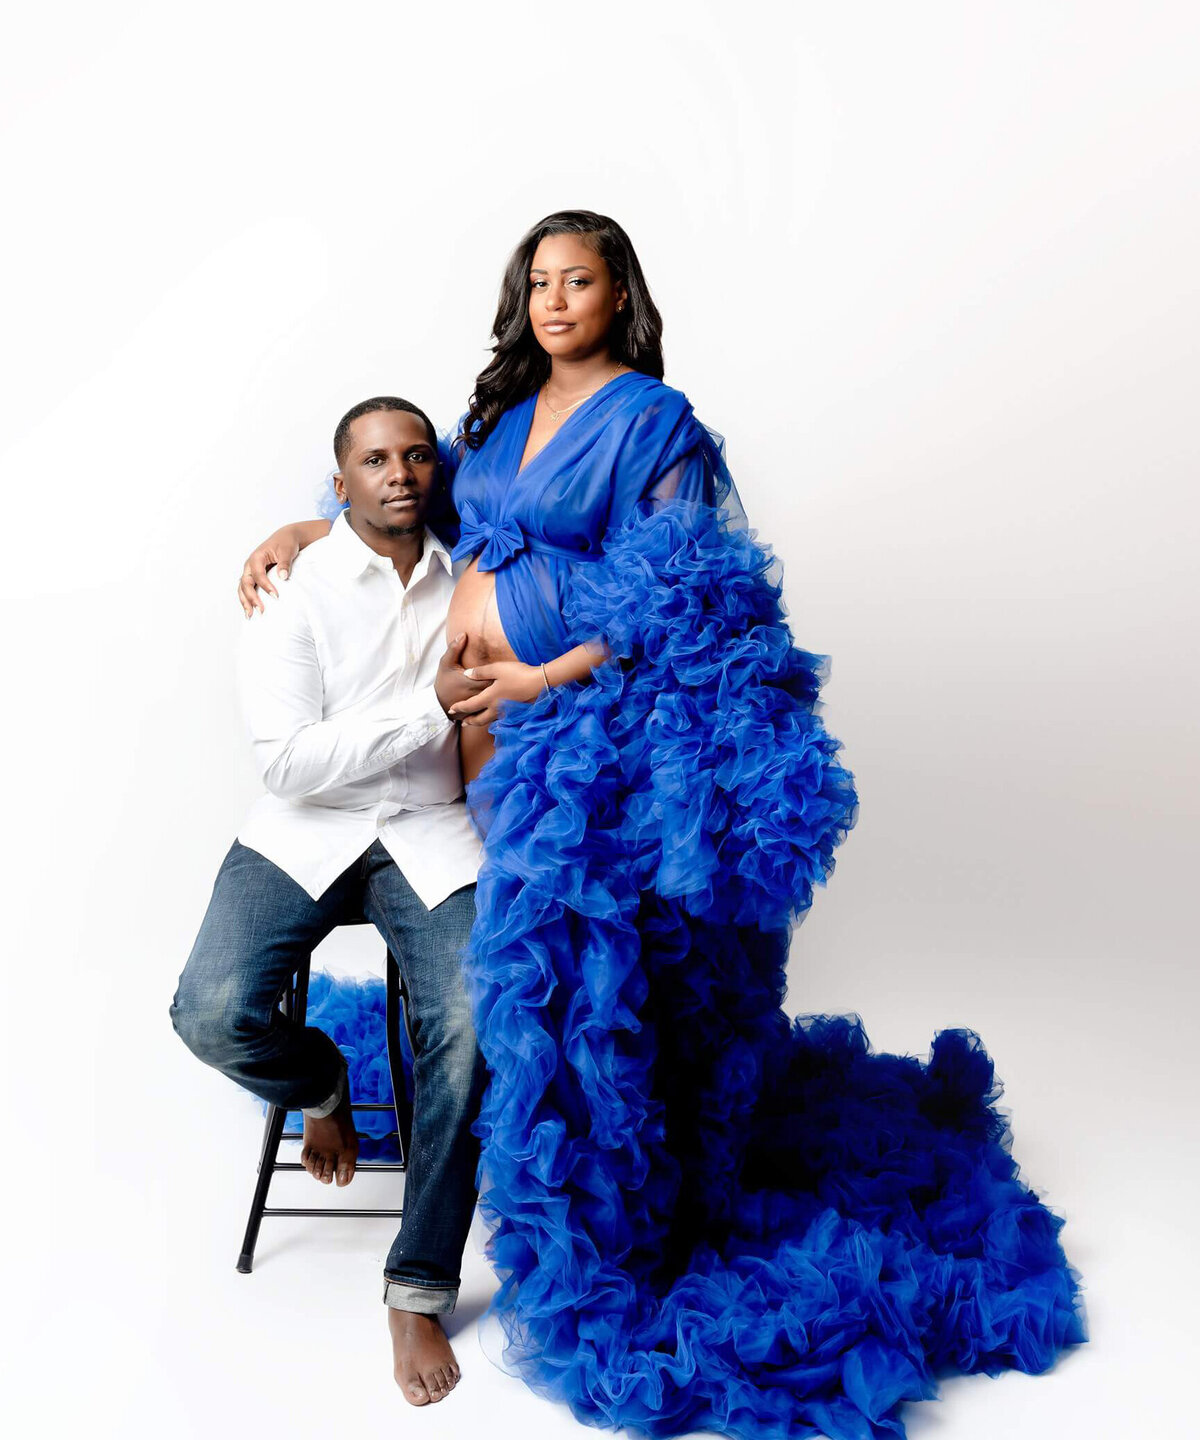 Husband and wife embrace during a maternity session. Woman wearing flowing dress with husband sitting beside her with hands on her belly.